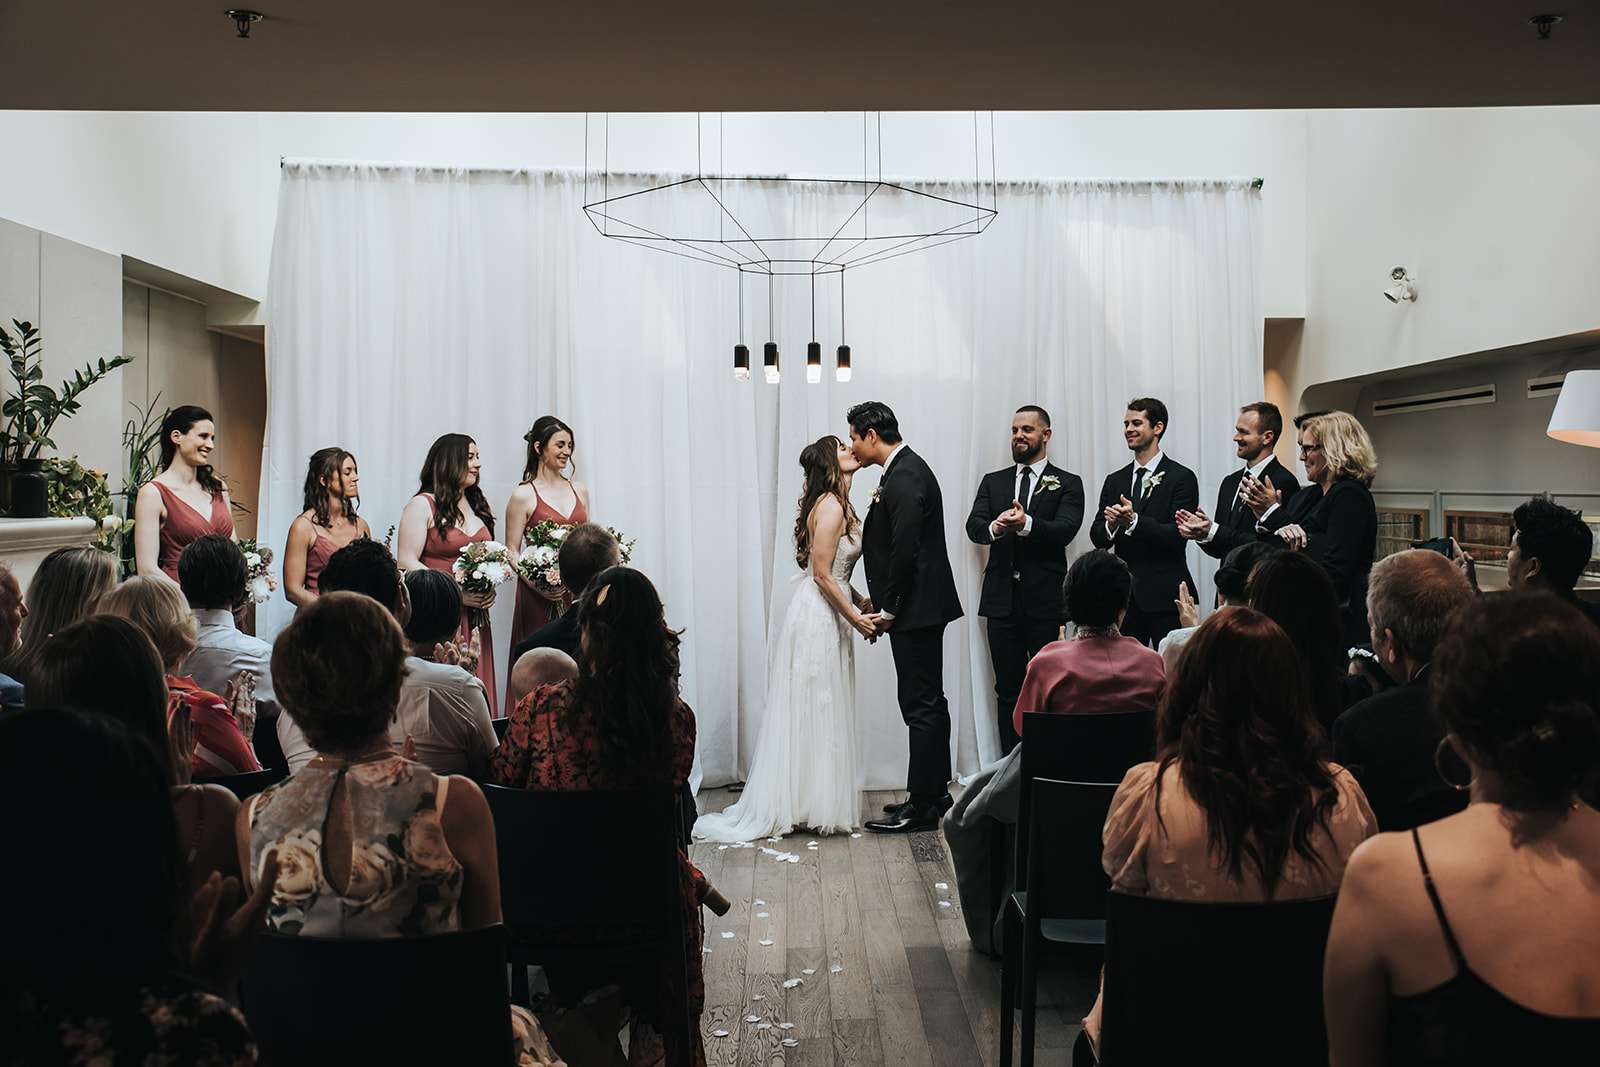 Timeless Sophistication: Eric and Lisa's September Alforno Bakery & Cafe Wedding